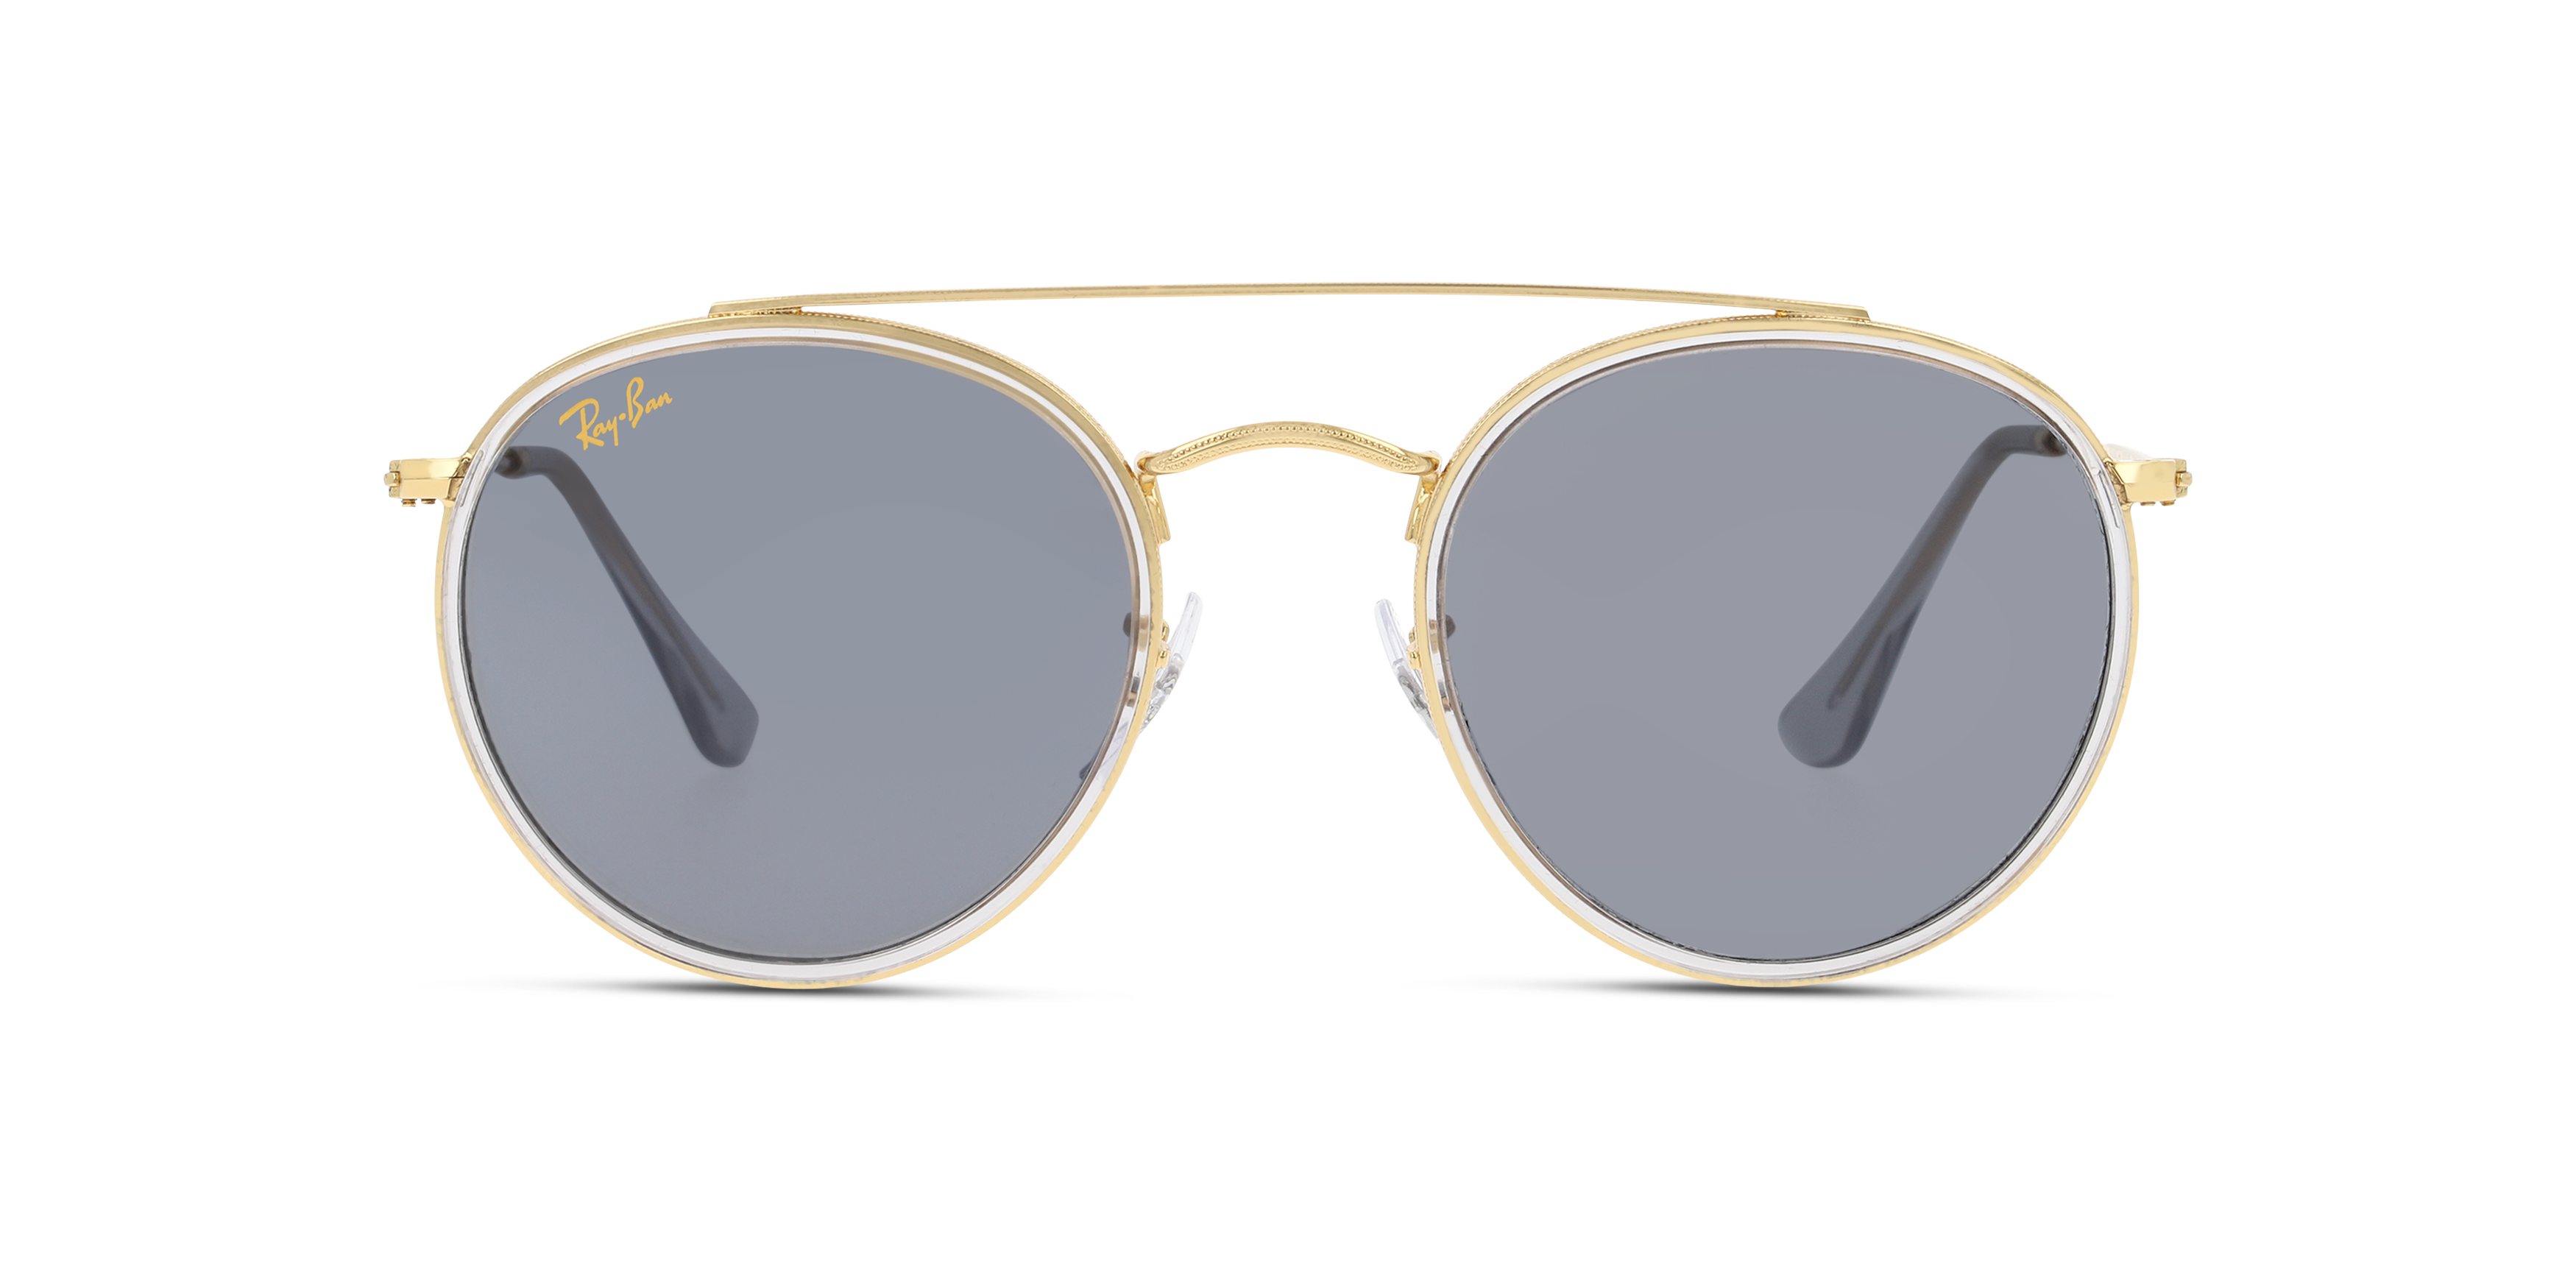 [products.image.front] RAY-BAN RB3647N 9210R5